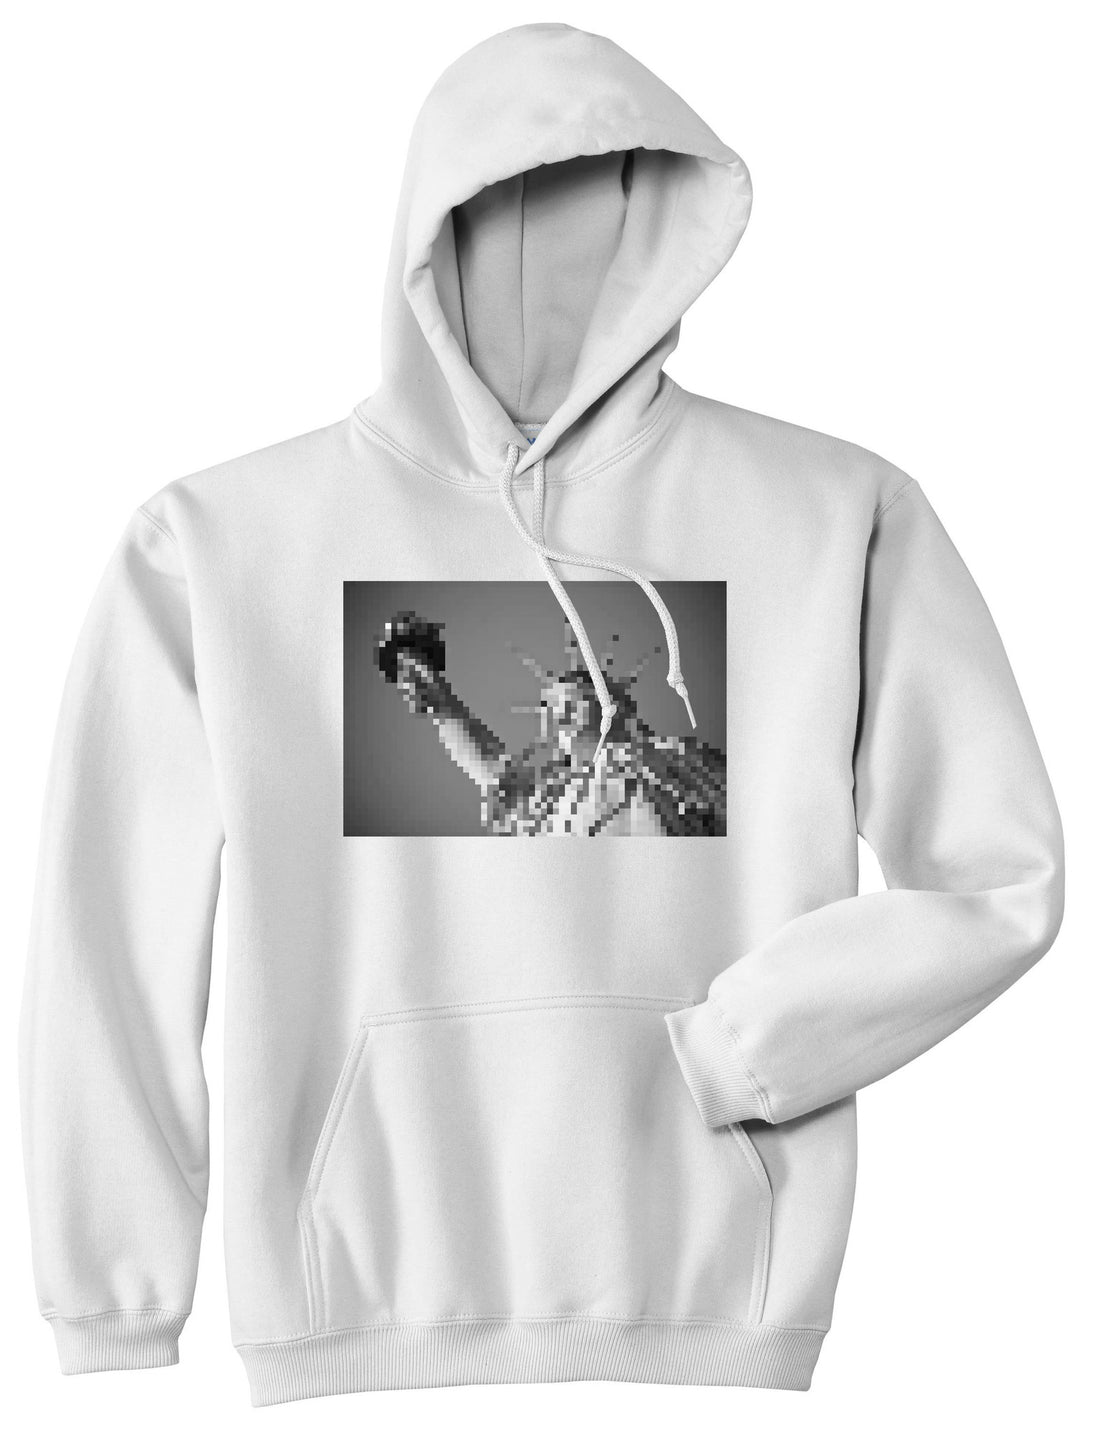 Statue Of Liberty Pixelated Boys Kids Pullover Hoodie Hoody in White by Kings Of NY